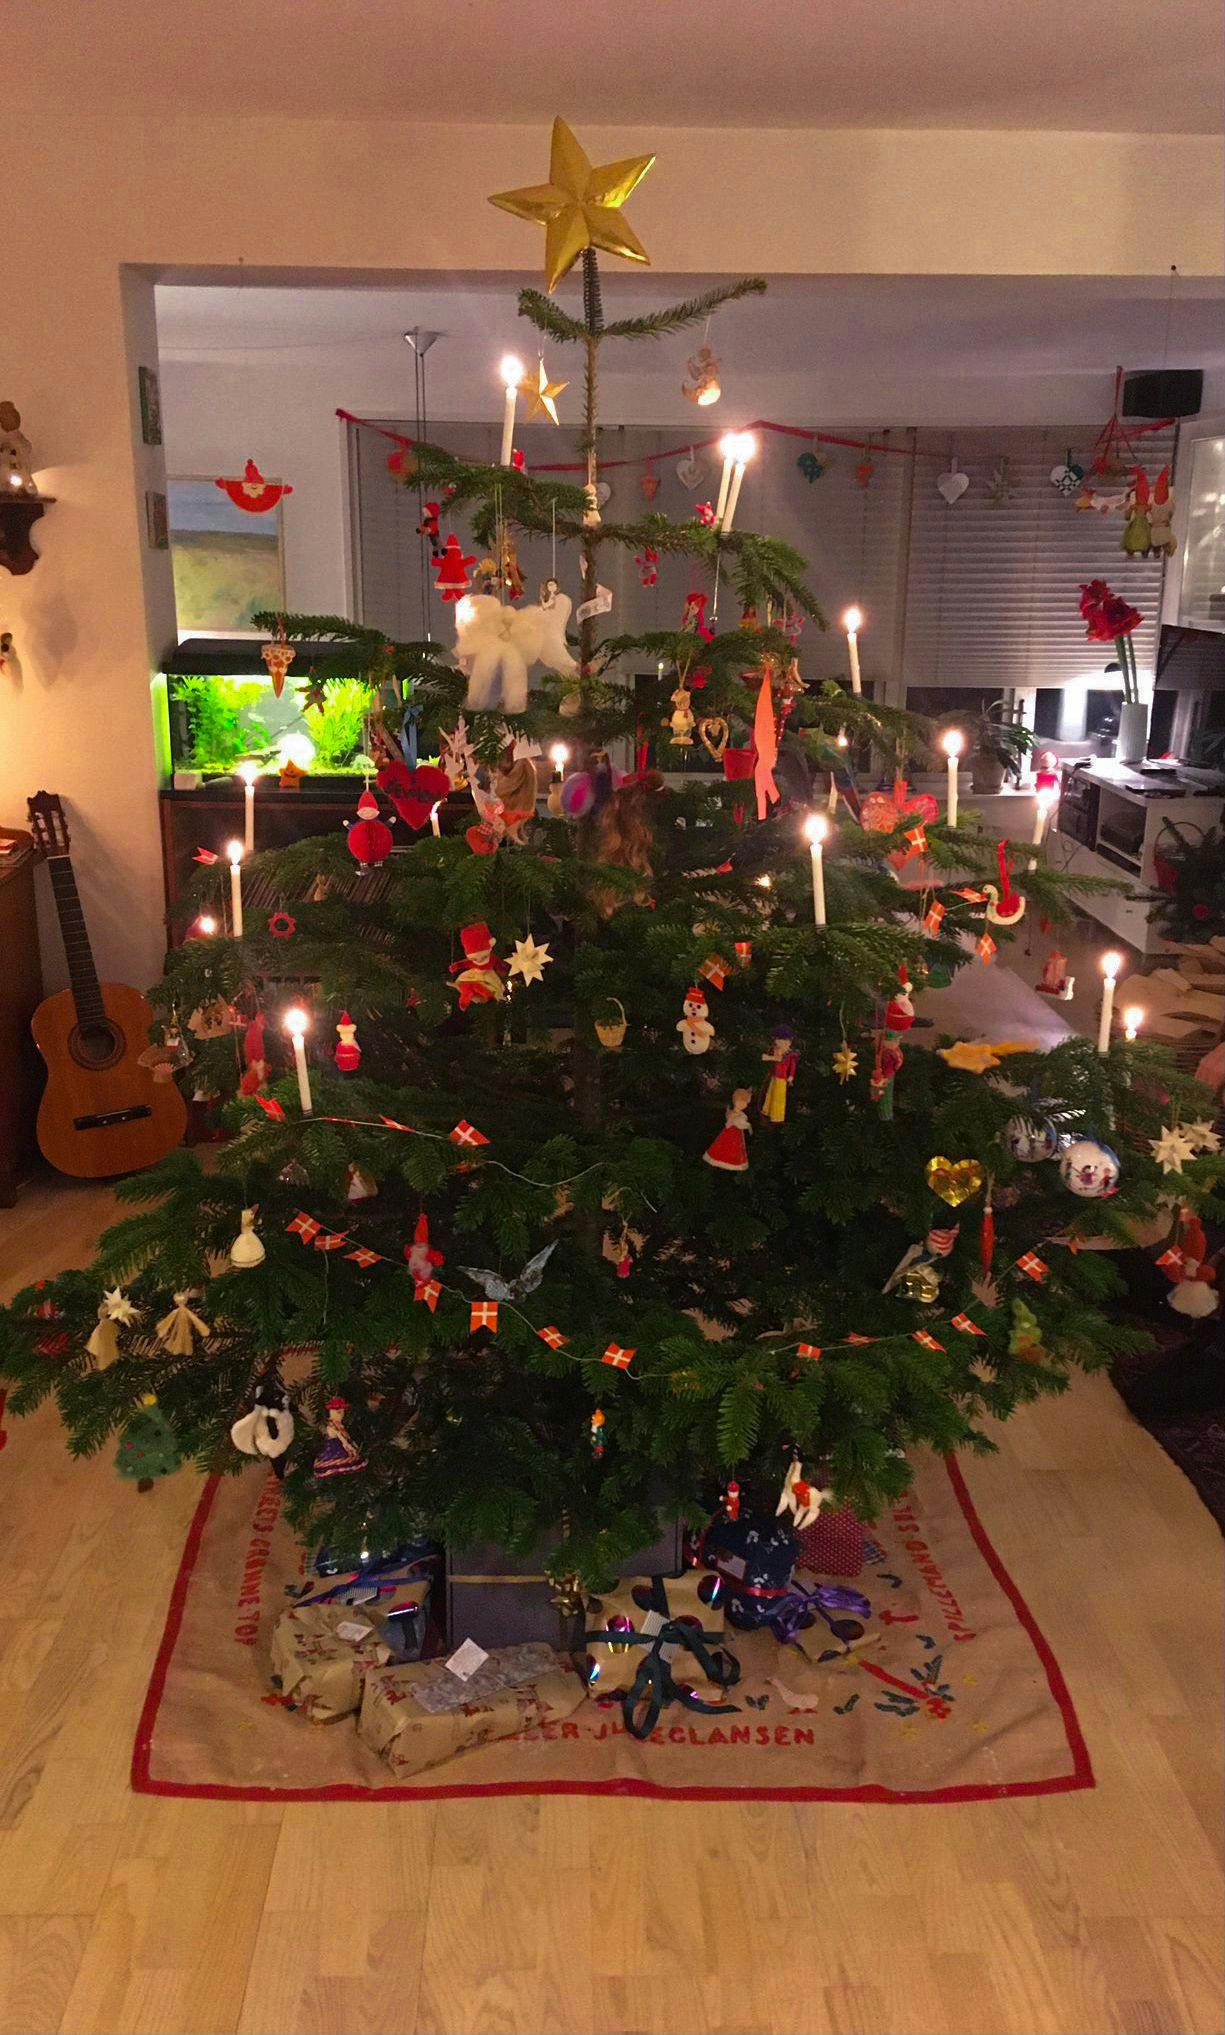 A Christmas tree decorated with Danish flags and candles stands tall